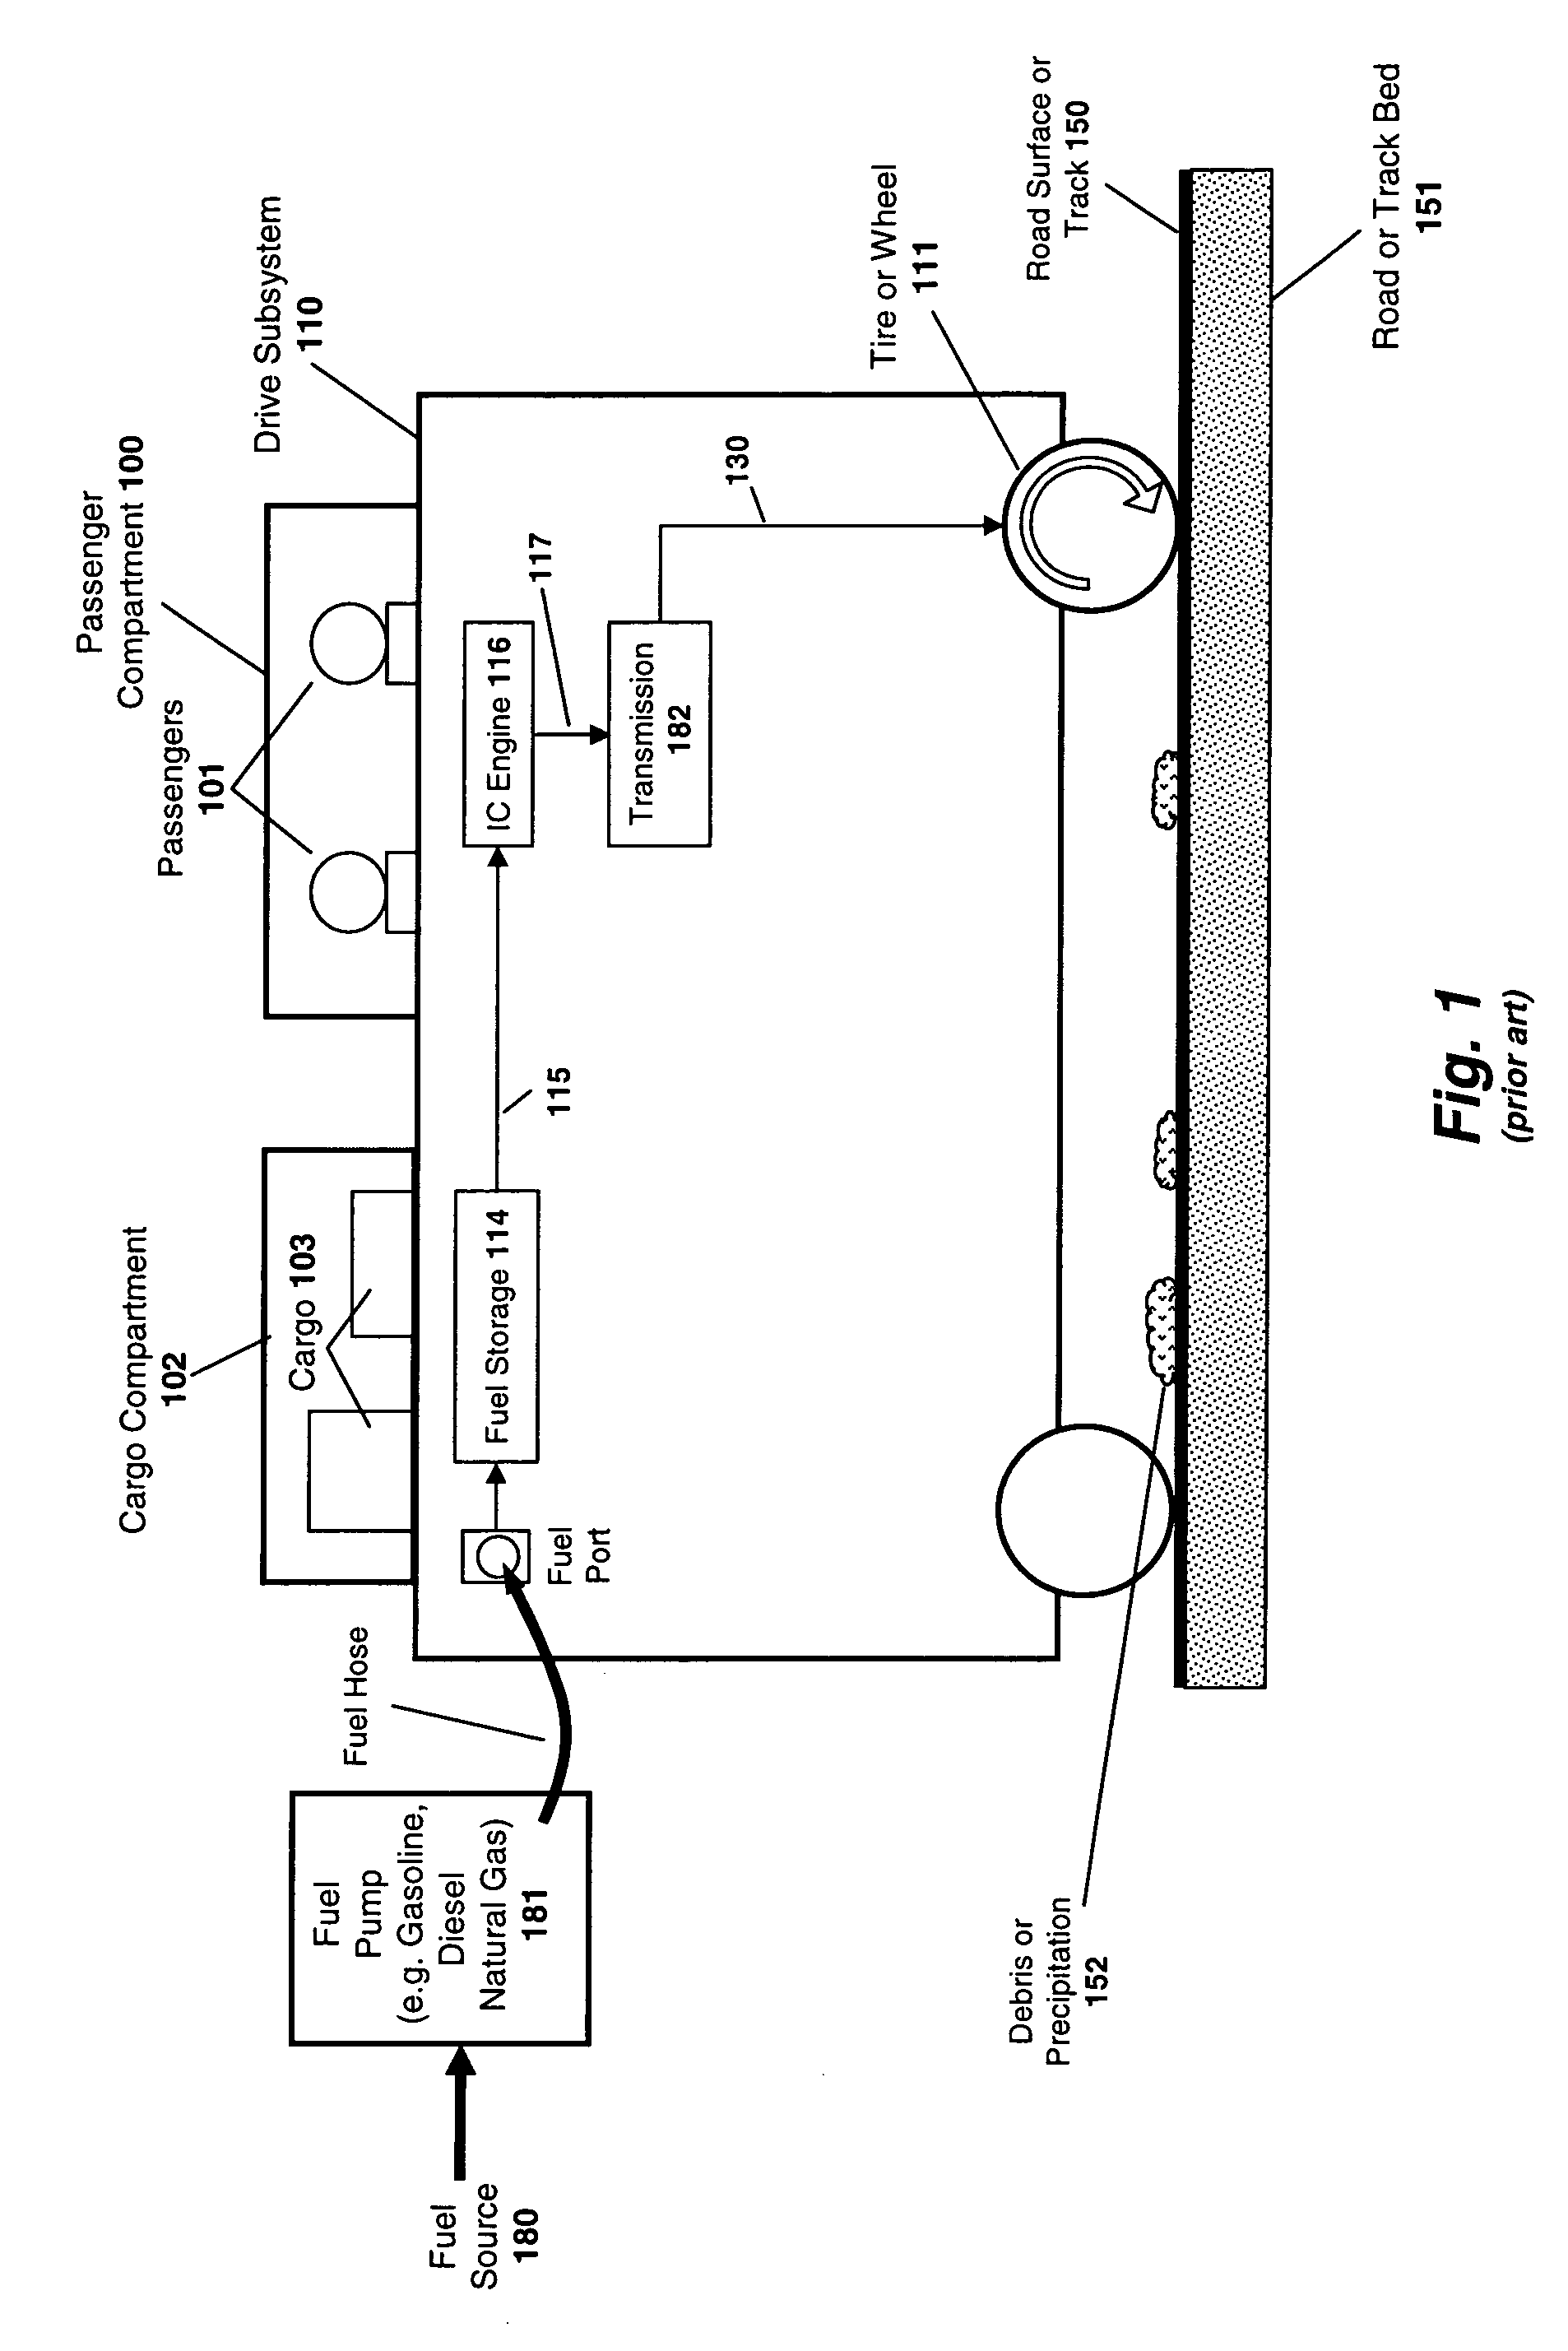 System and method for powering a vehicle using radio frequency generators